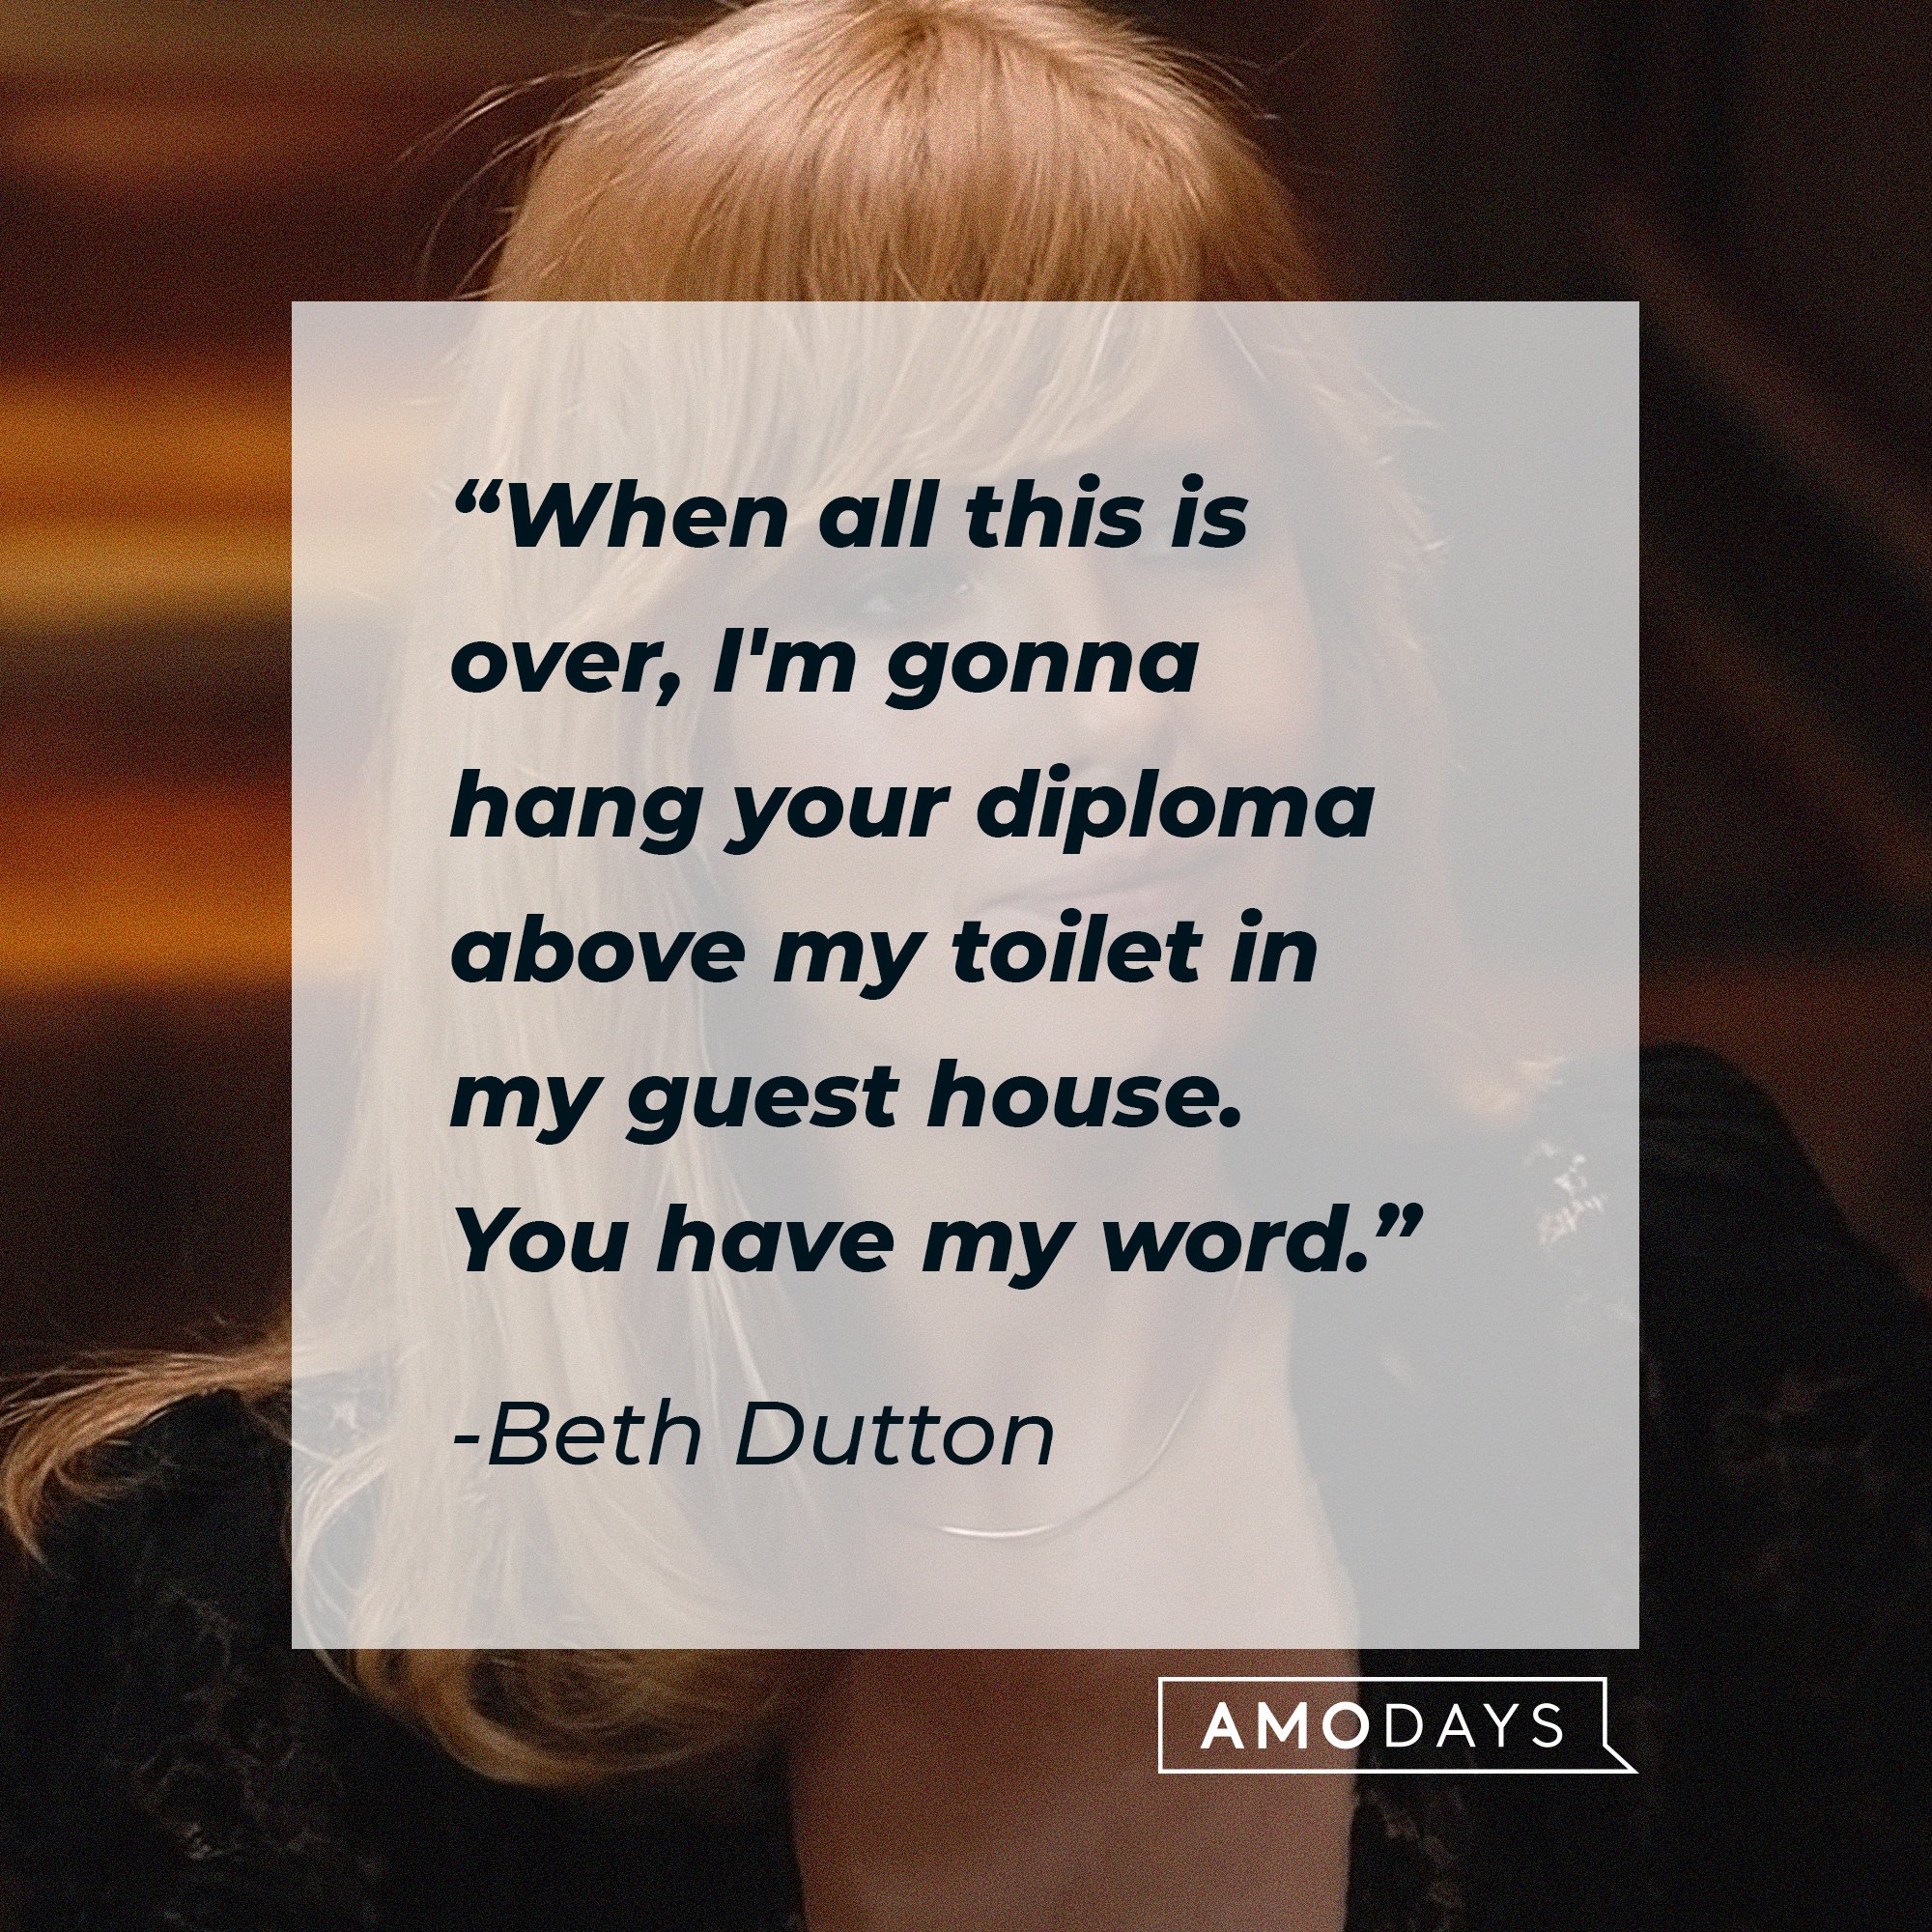  Beth Dutton's quote: "When all this is over, I'm gonna hang your diploma above my toilet in my guest house. You have my word." | Source: AmoDays